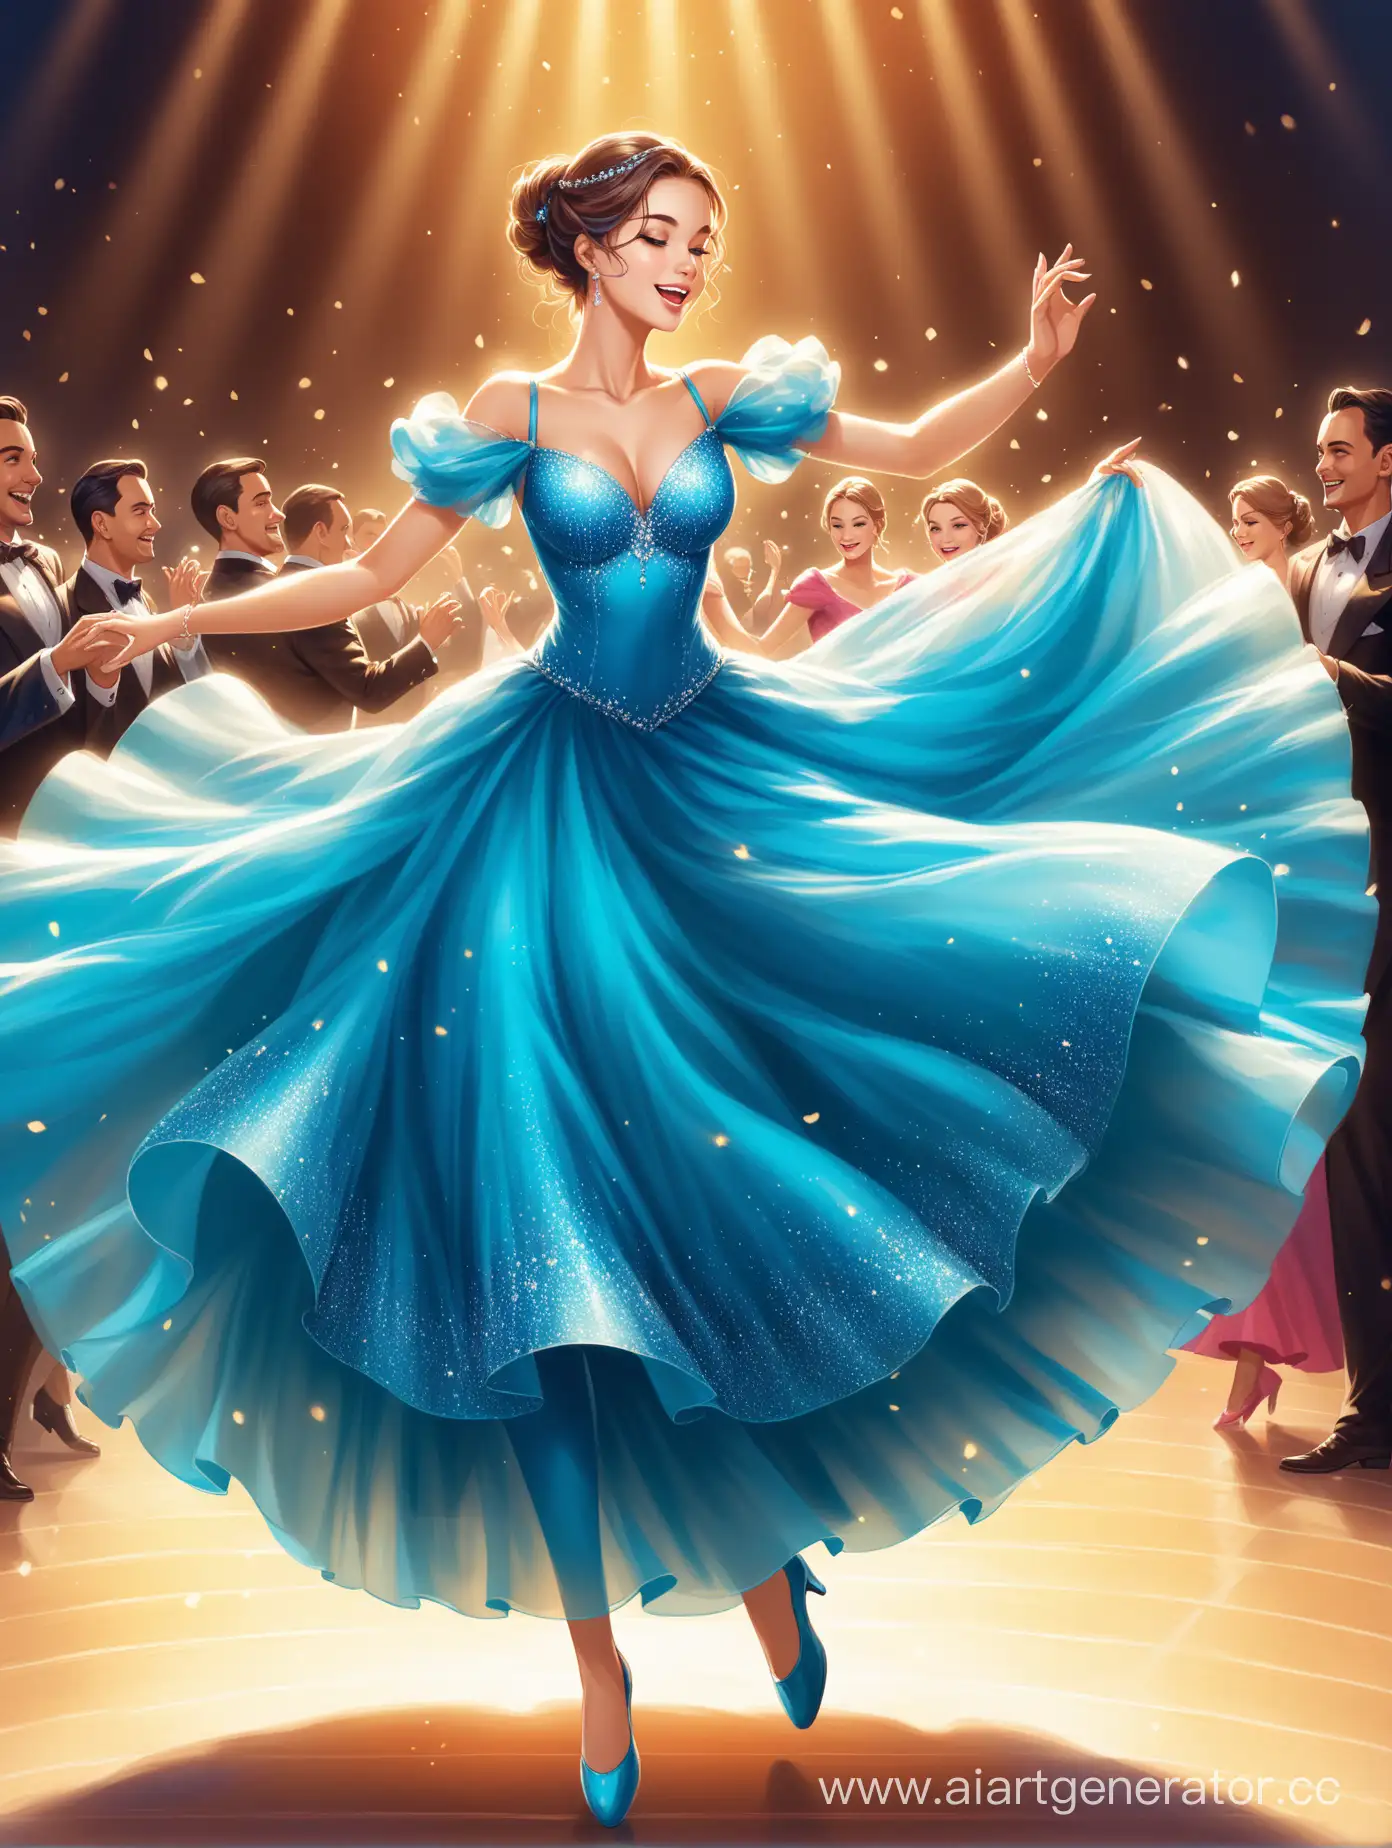 Elegant-Lady-Dancing-in-a-Blue-Ball-Gown